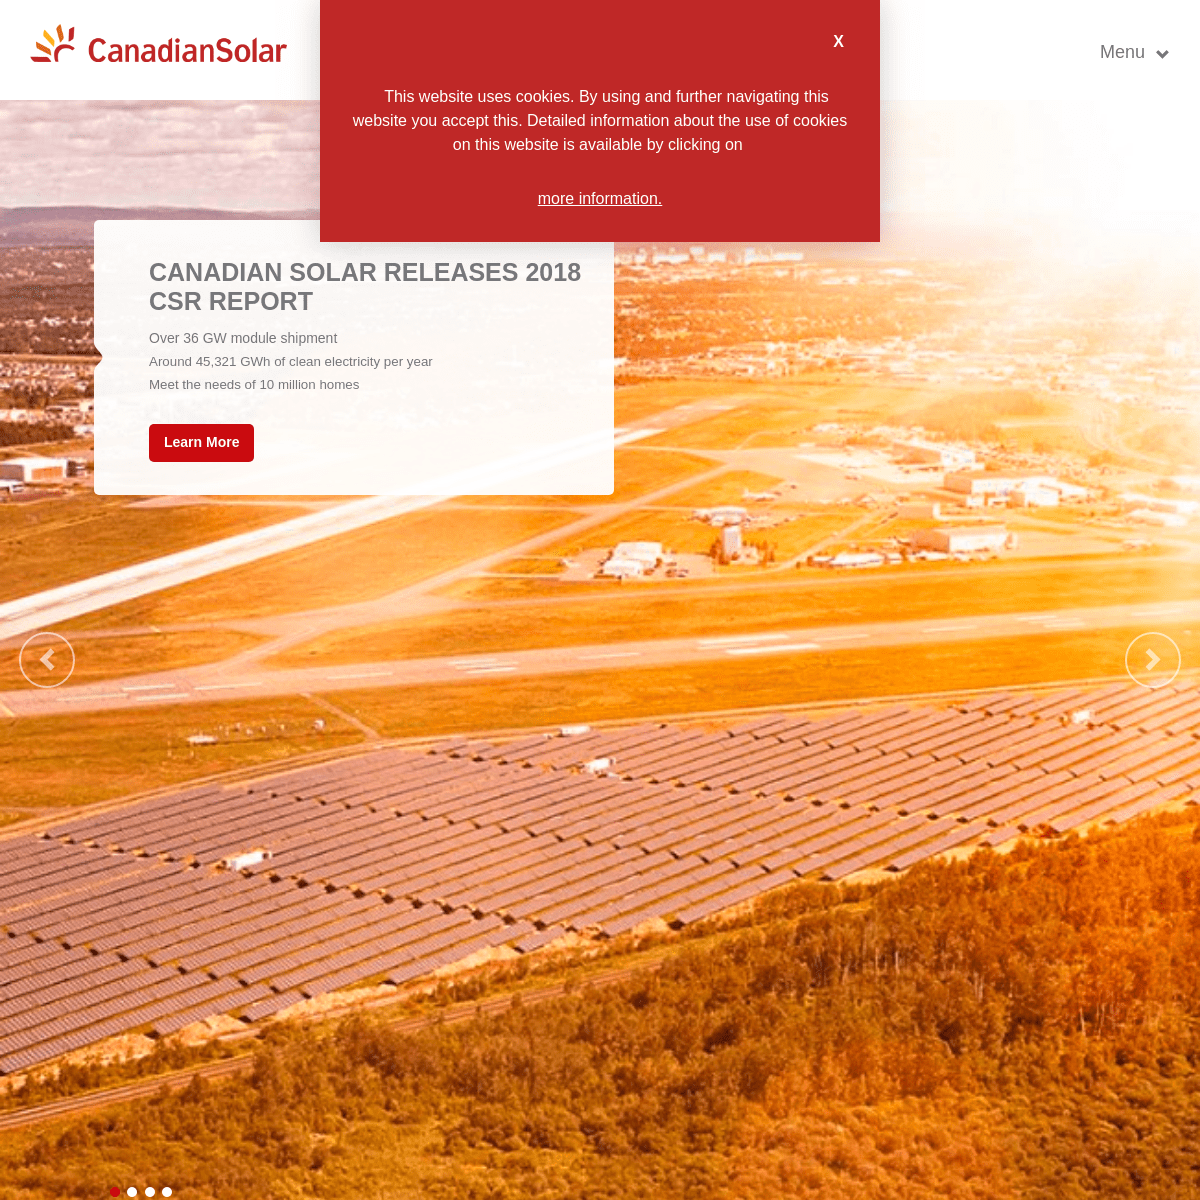 A complete backup of canadiansolar.com